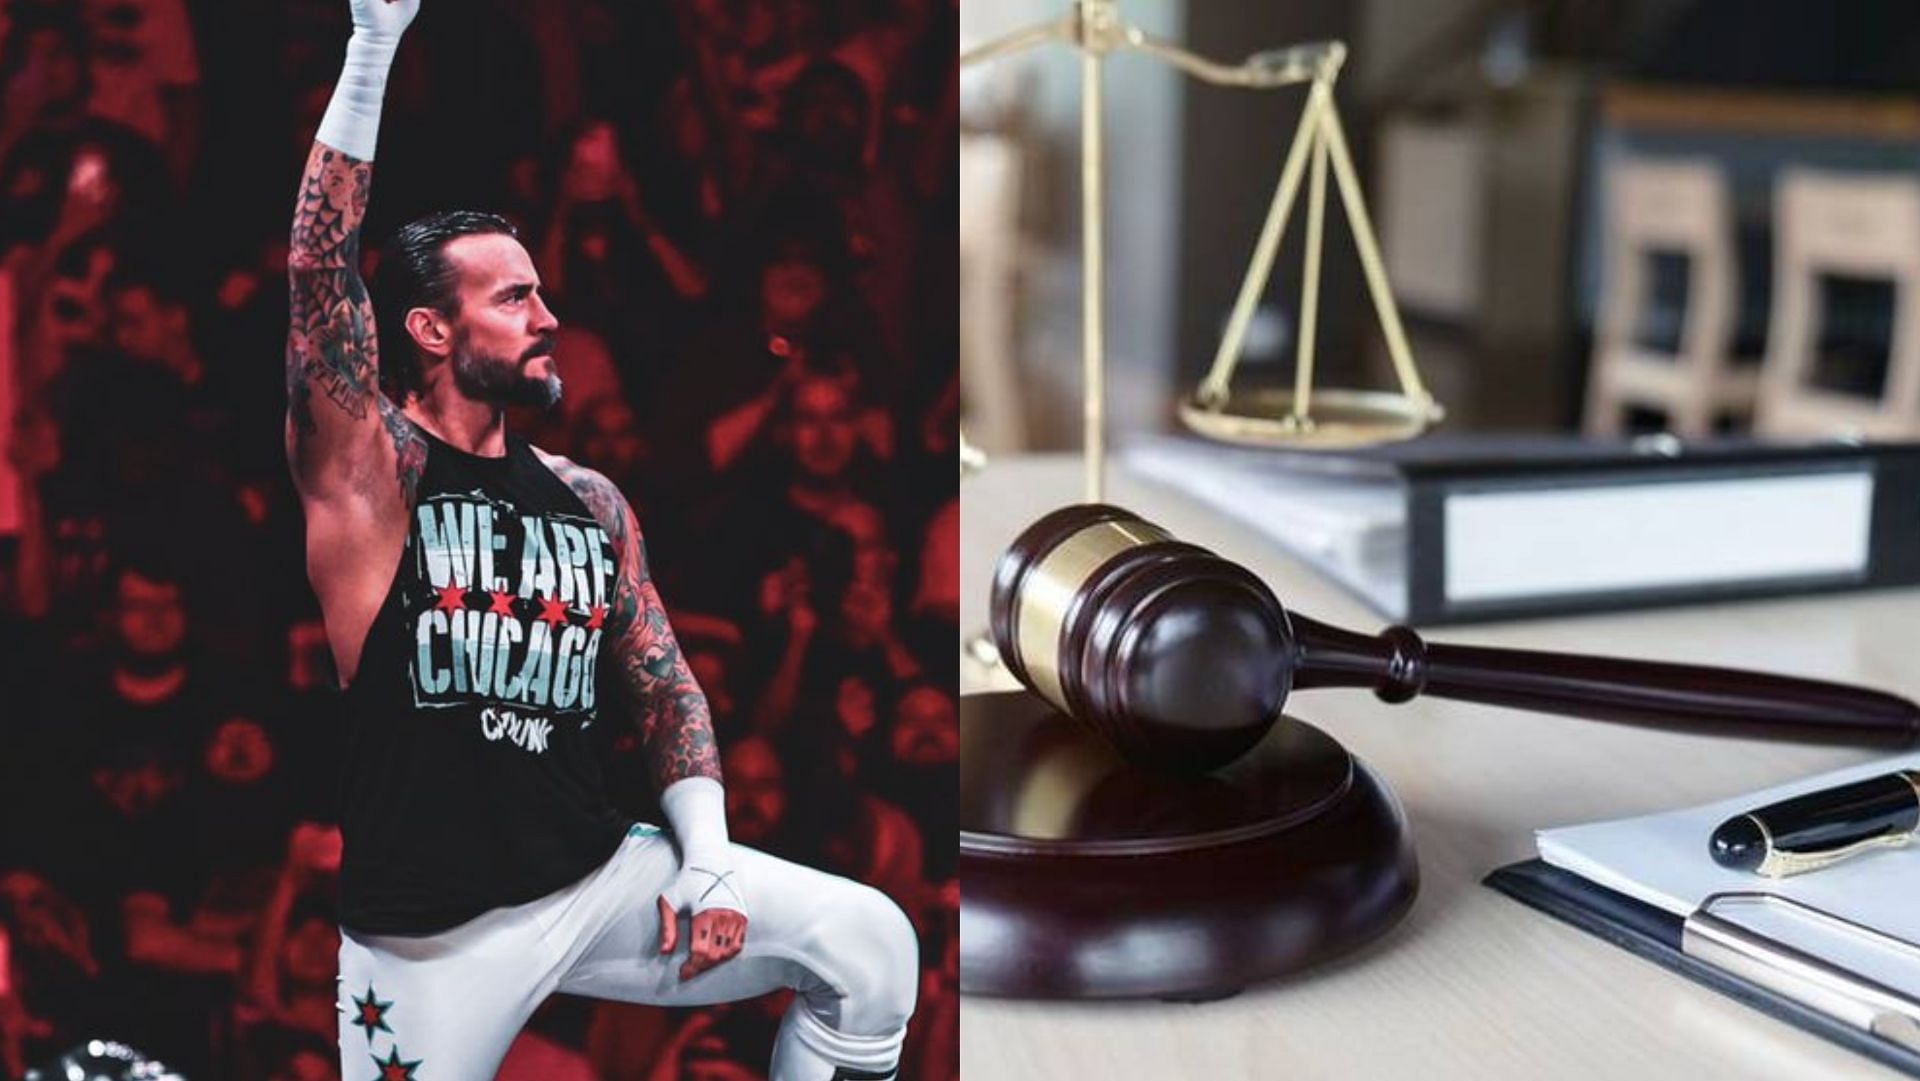 CM Punk and other AEW stars could have lawsuits on their hands